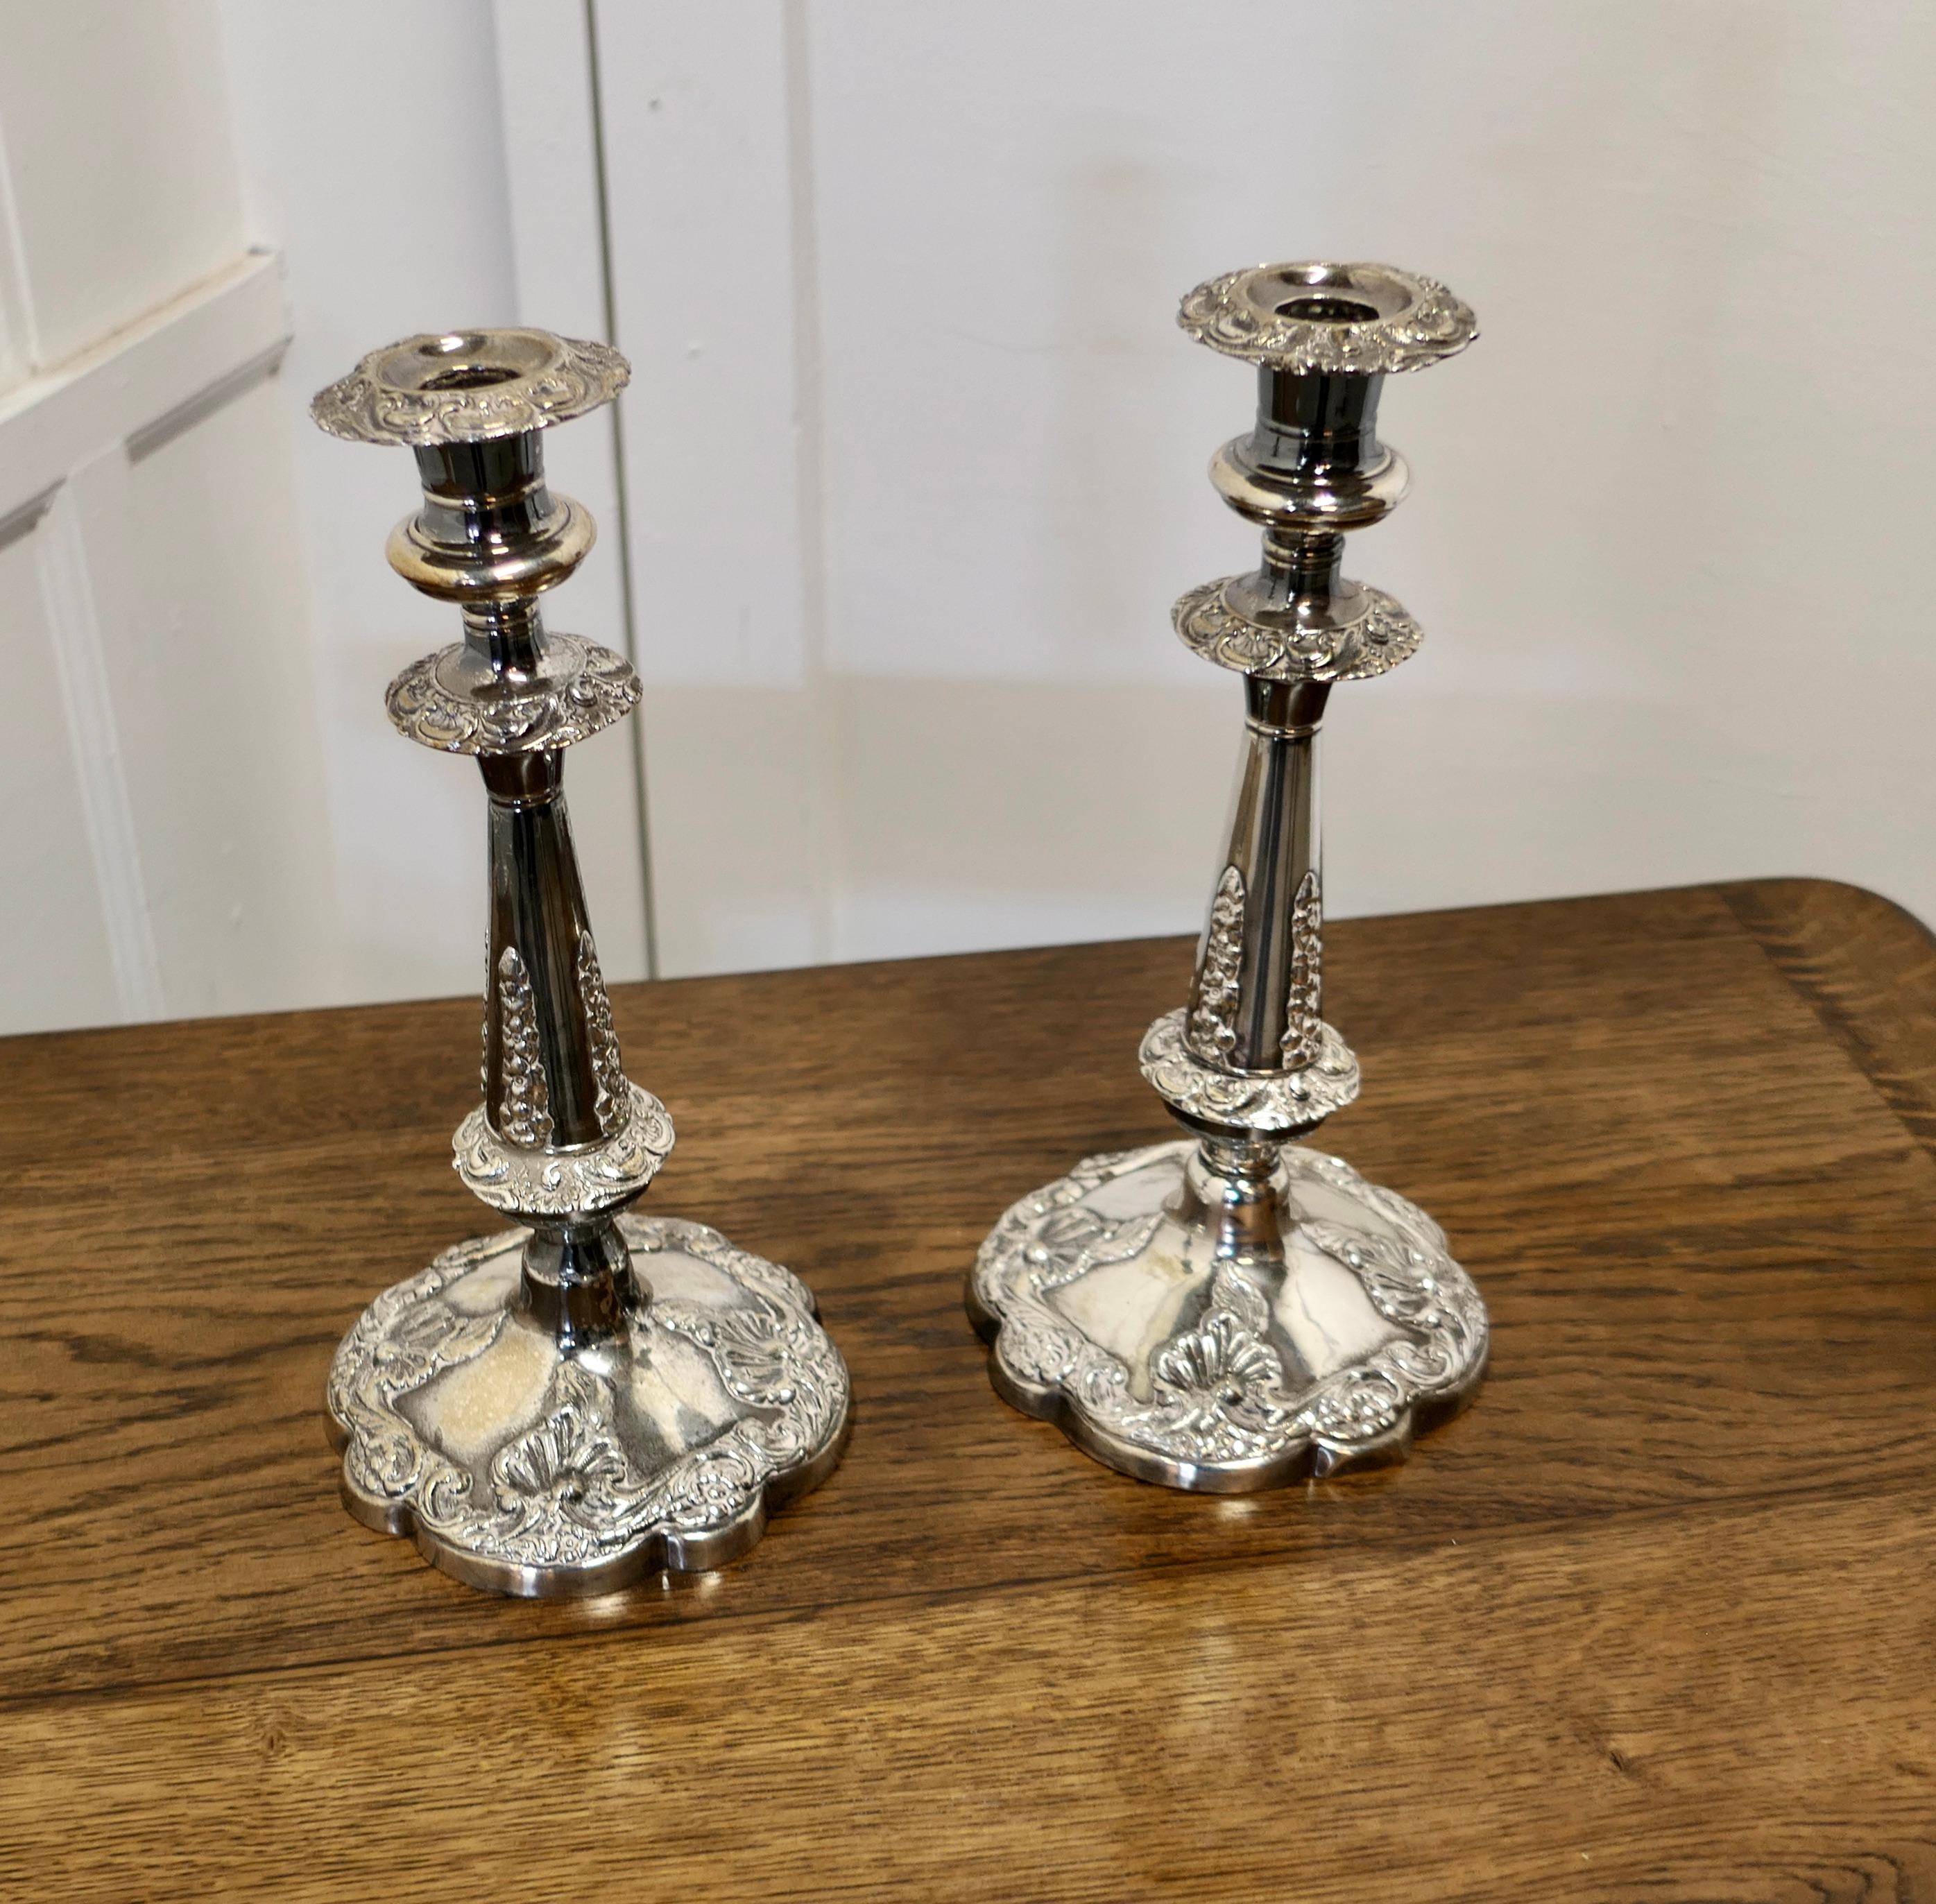 Rococo Revival Pair of 19th Century Silver Plated Candle Sticks For Sale